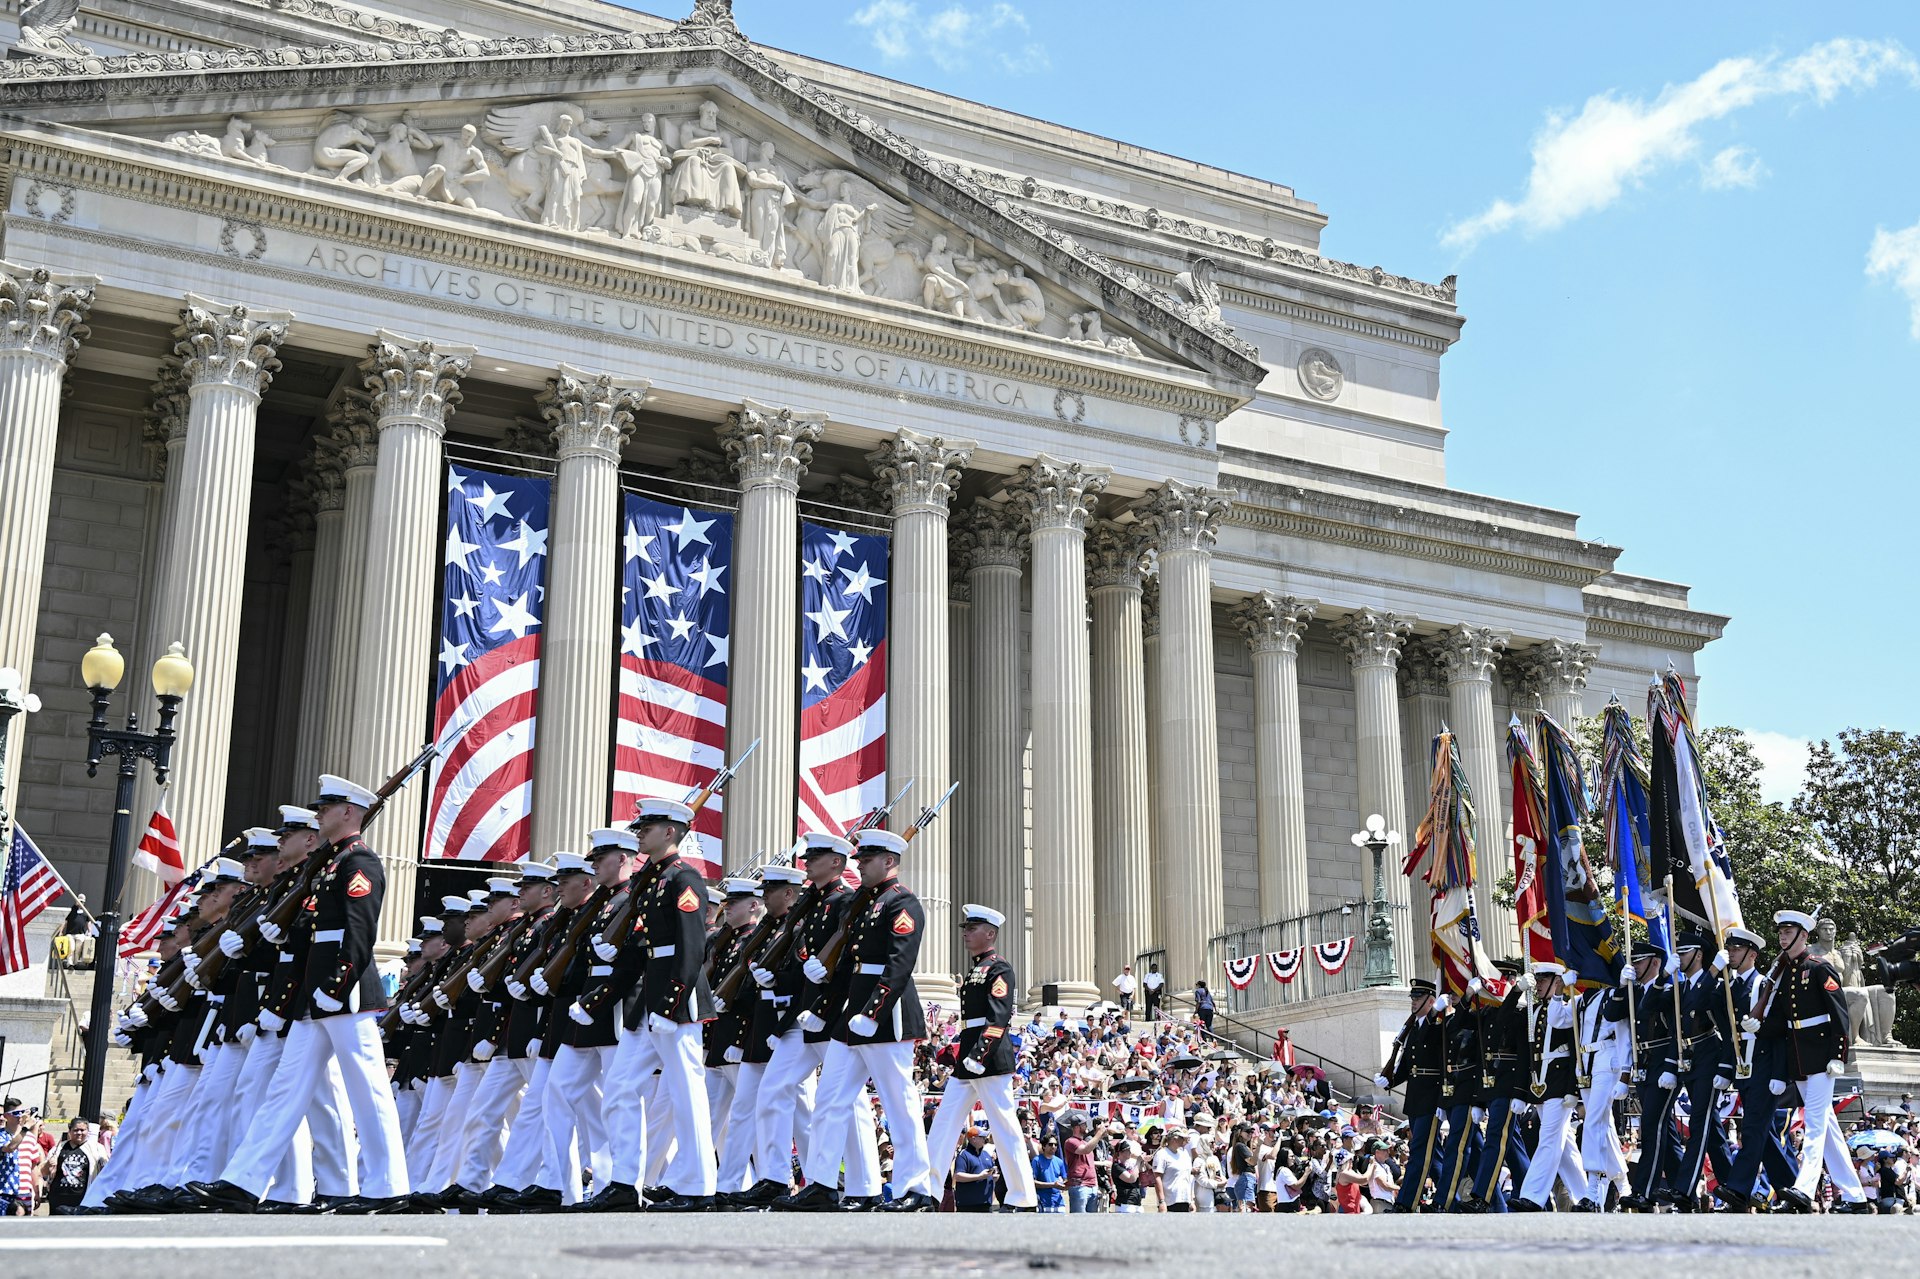 A military parade passes in front of the National Archives during Fourth of July celebrations in Washington, DC